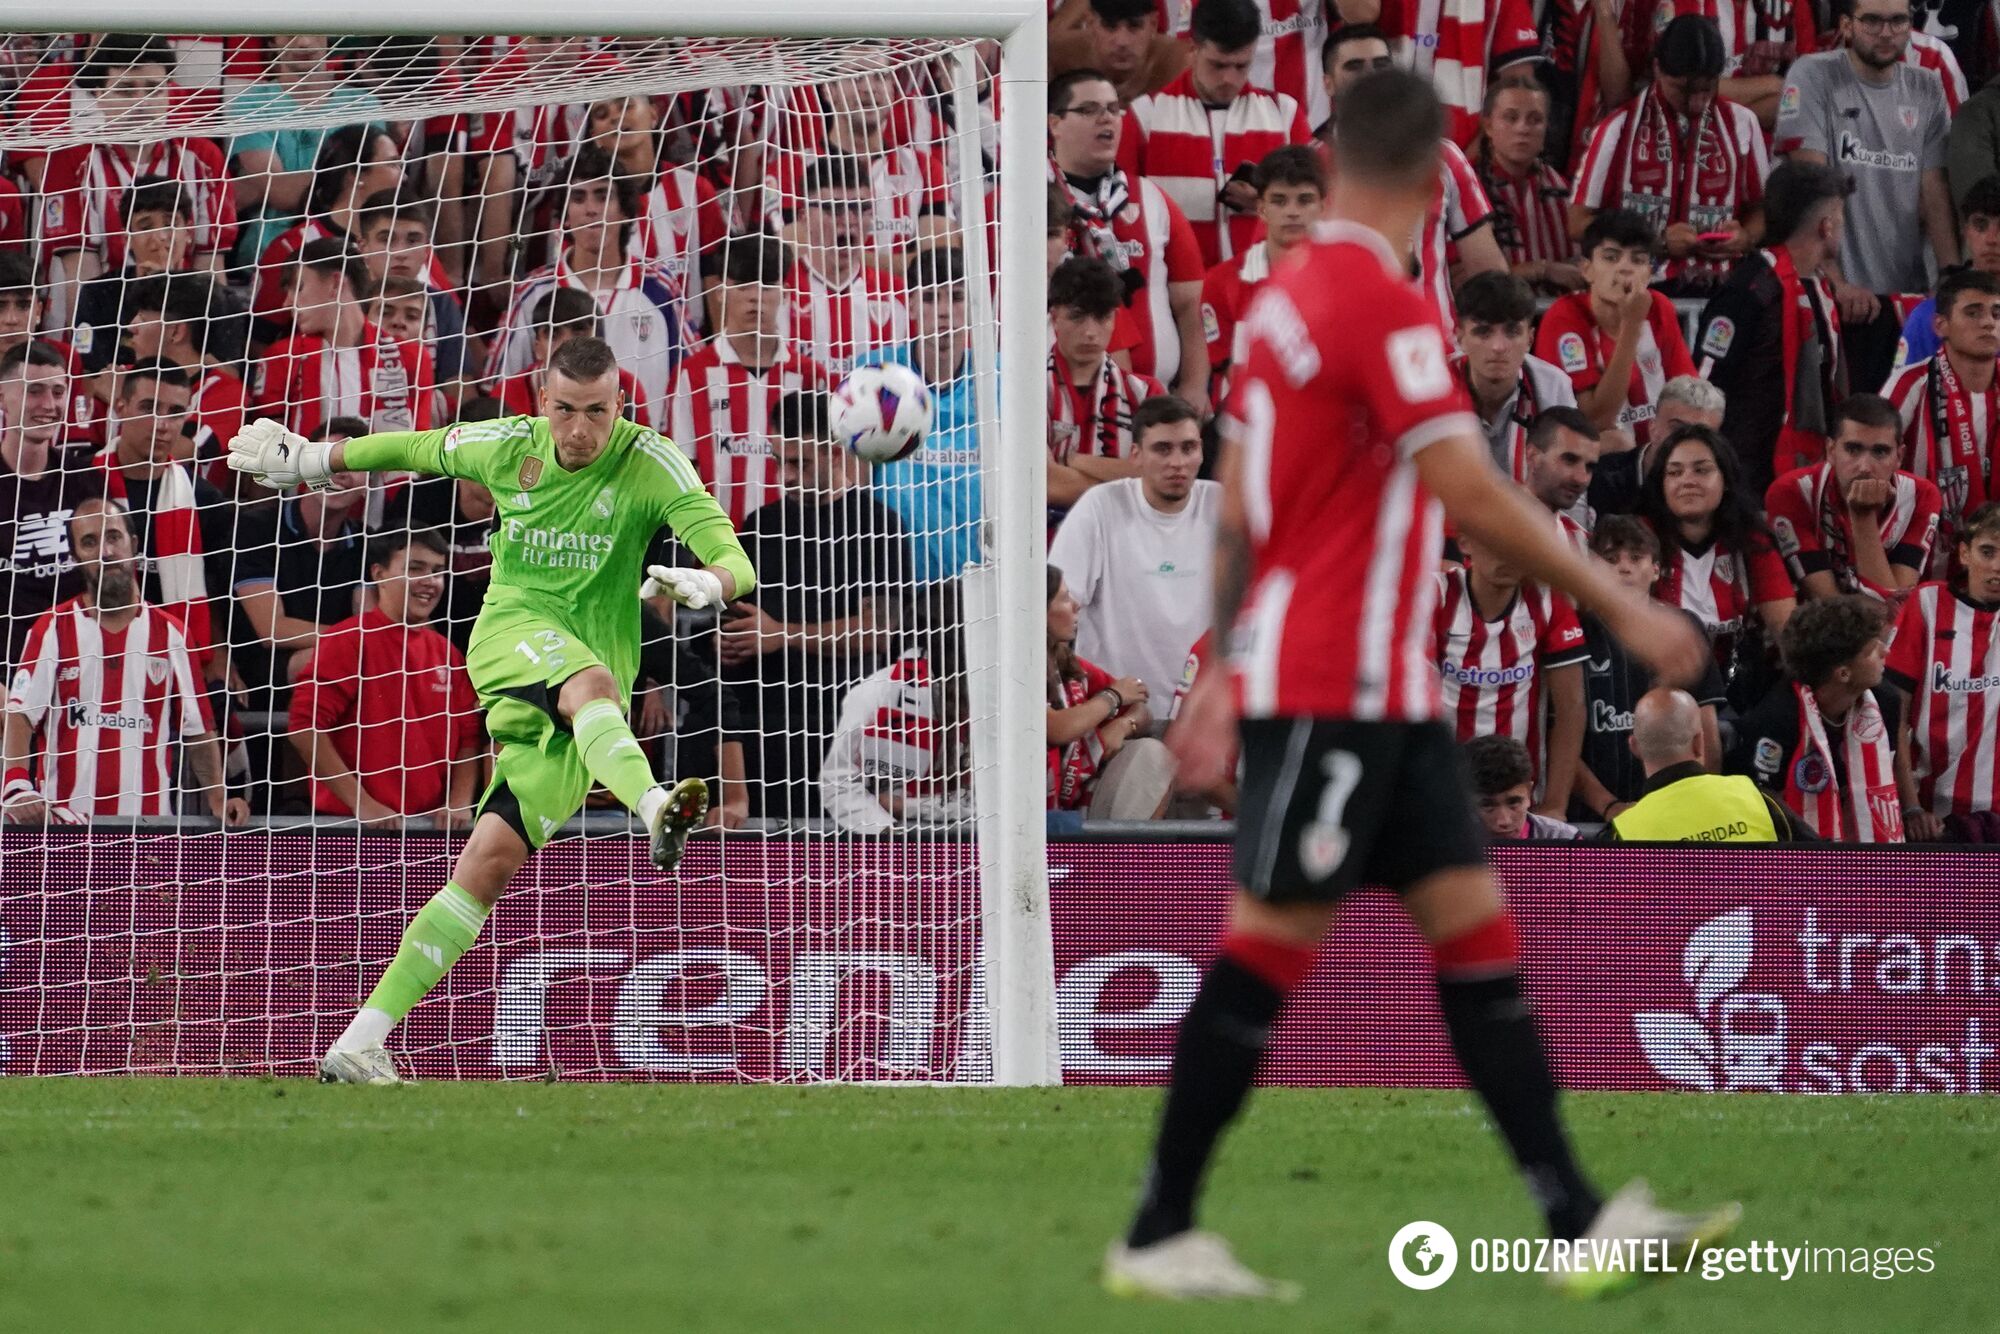 Lunin had a great match in Spain, replacing recently injured Courtois. Video